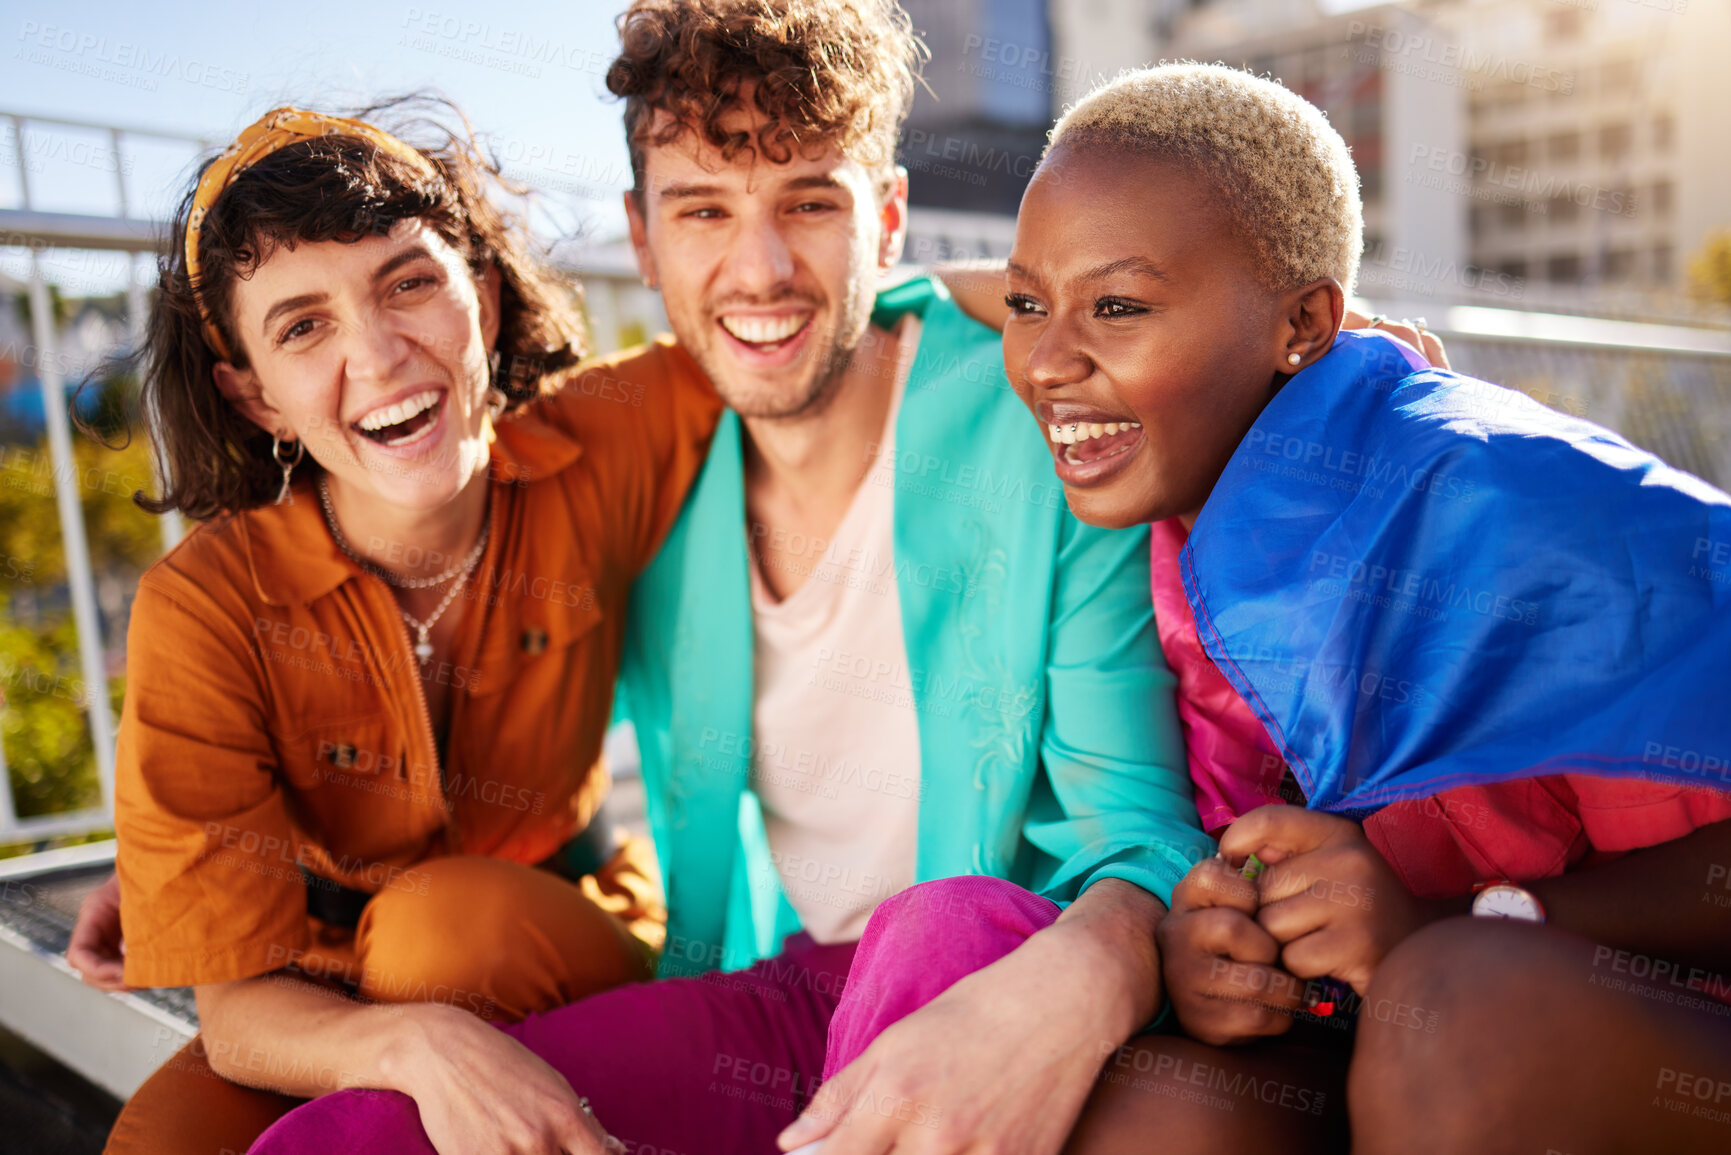 Buy stock photo Support, love and lgbtq with friends and flag in city for freedom, gay pride and equality. Culture, celebration or inclusion with portrait of group of people for community, diversity and human rights